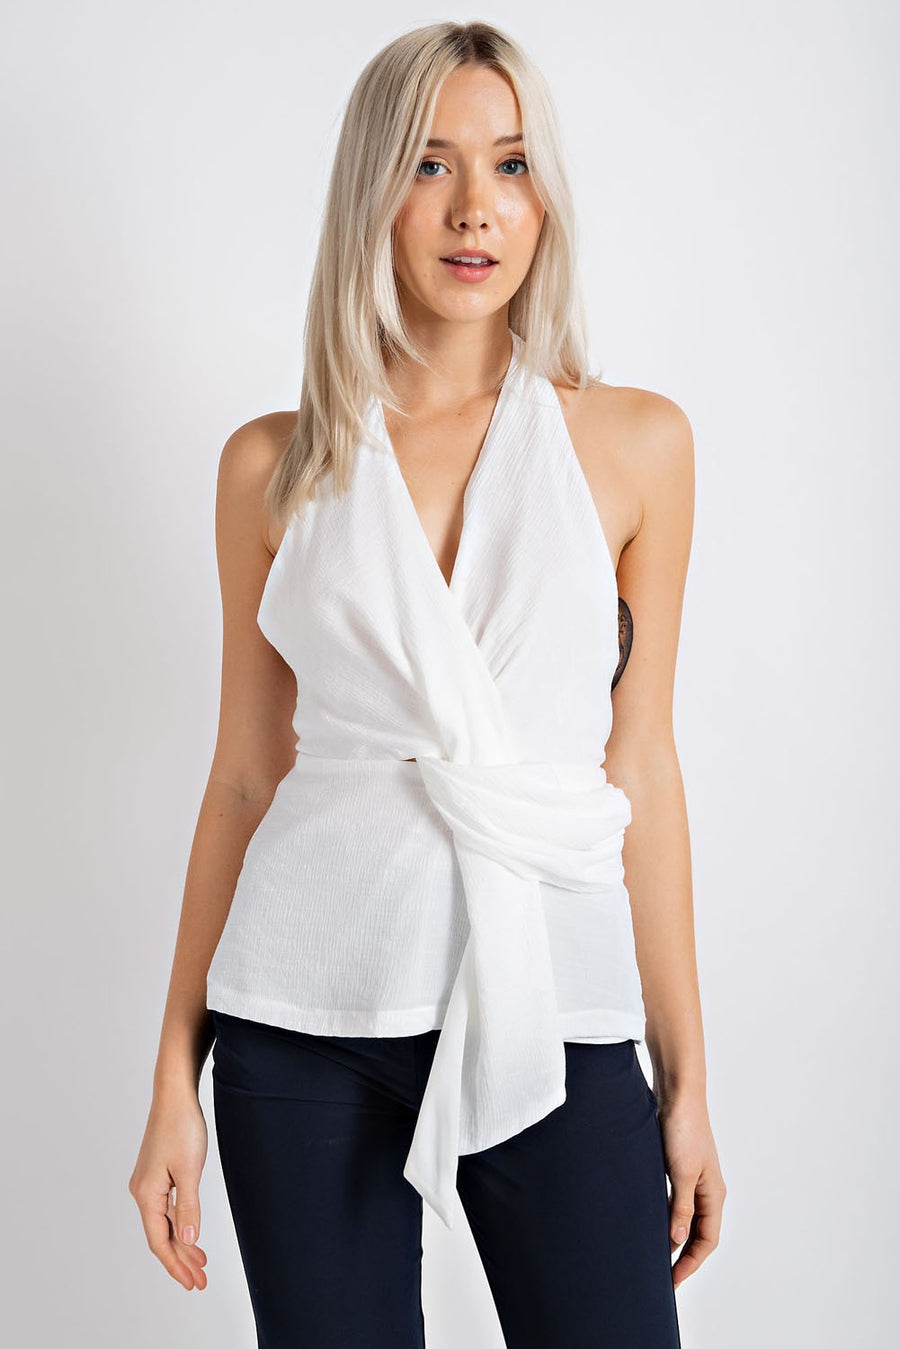 Sleeveless halter top with front knot detail.